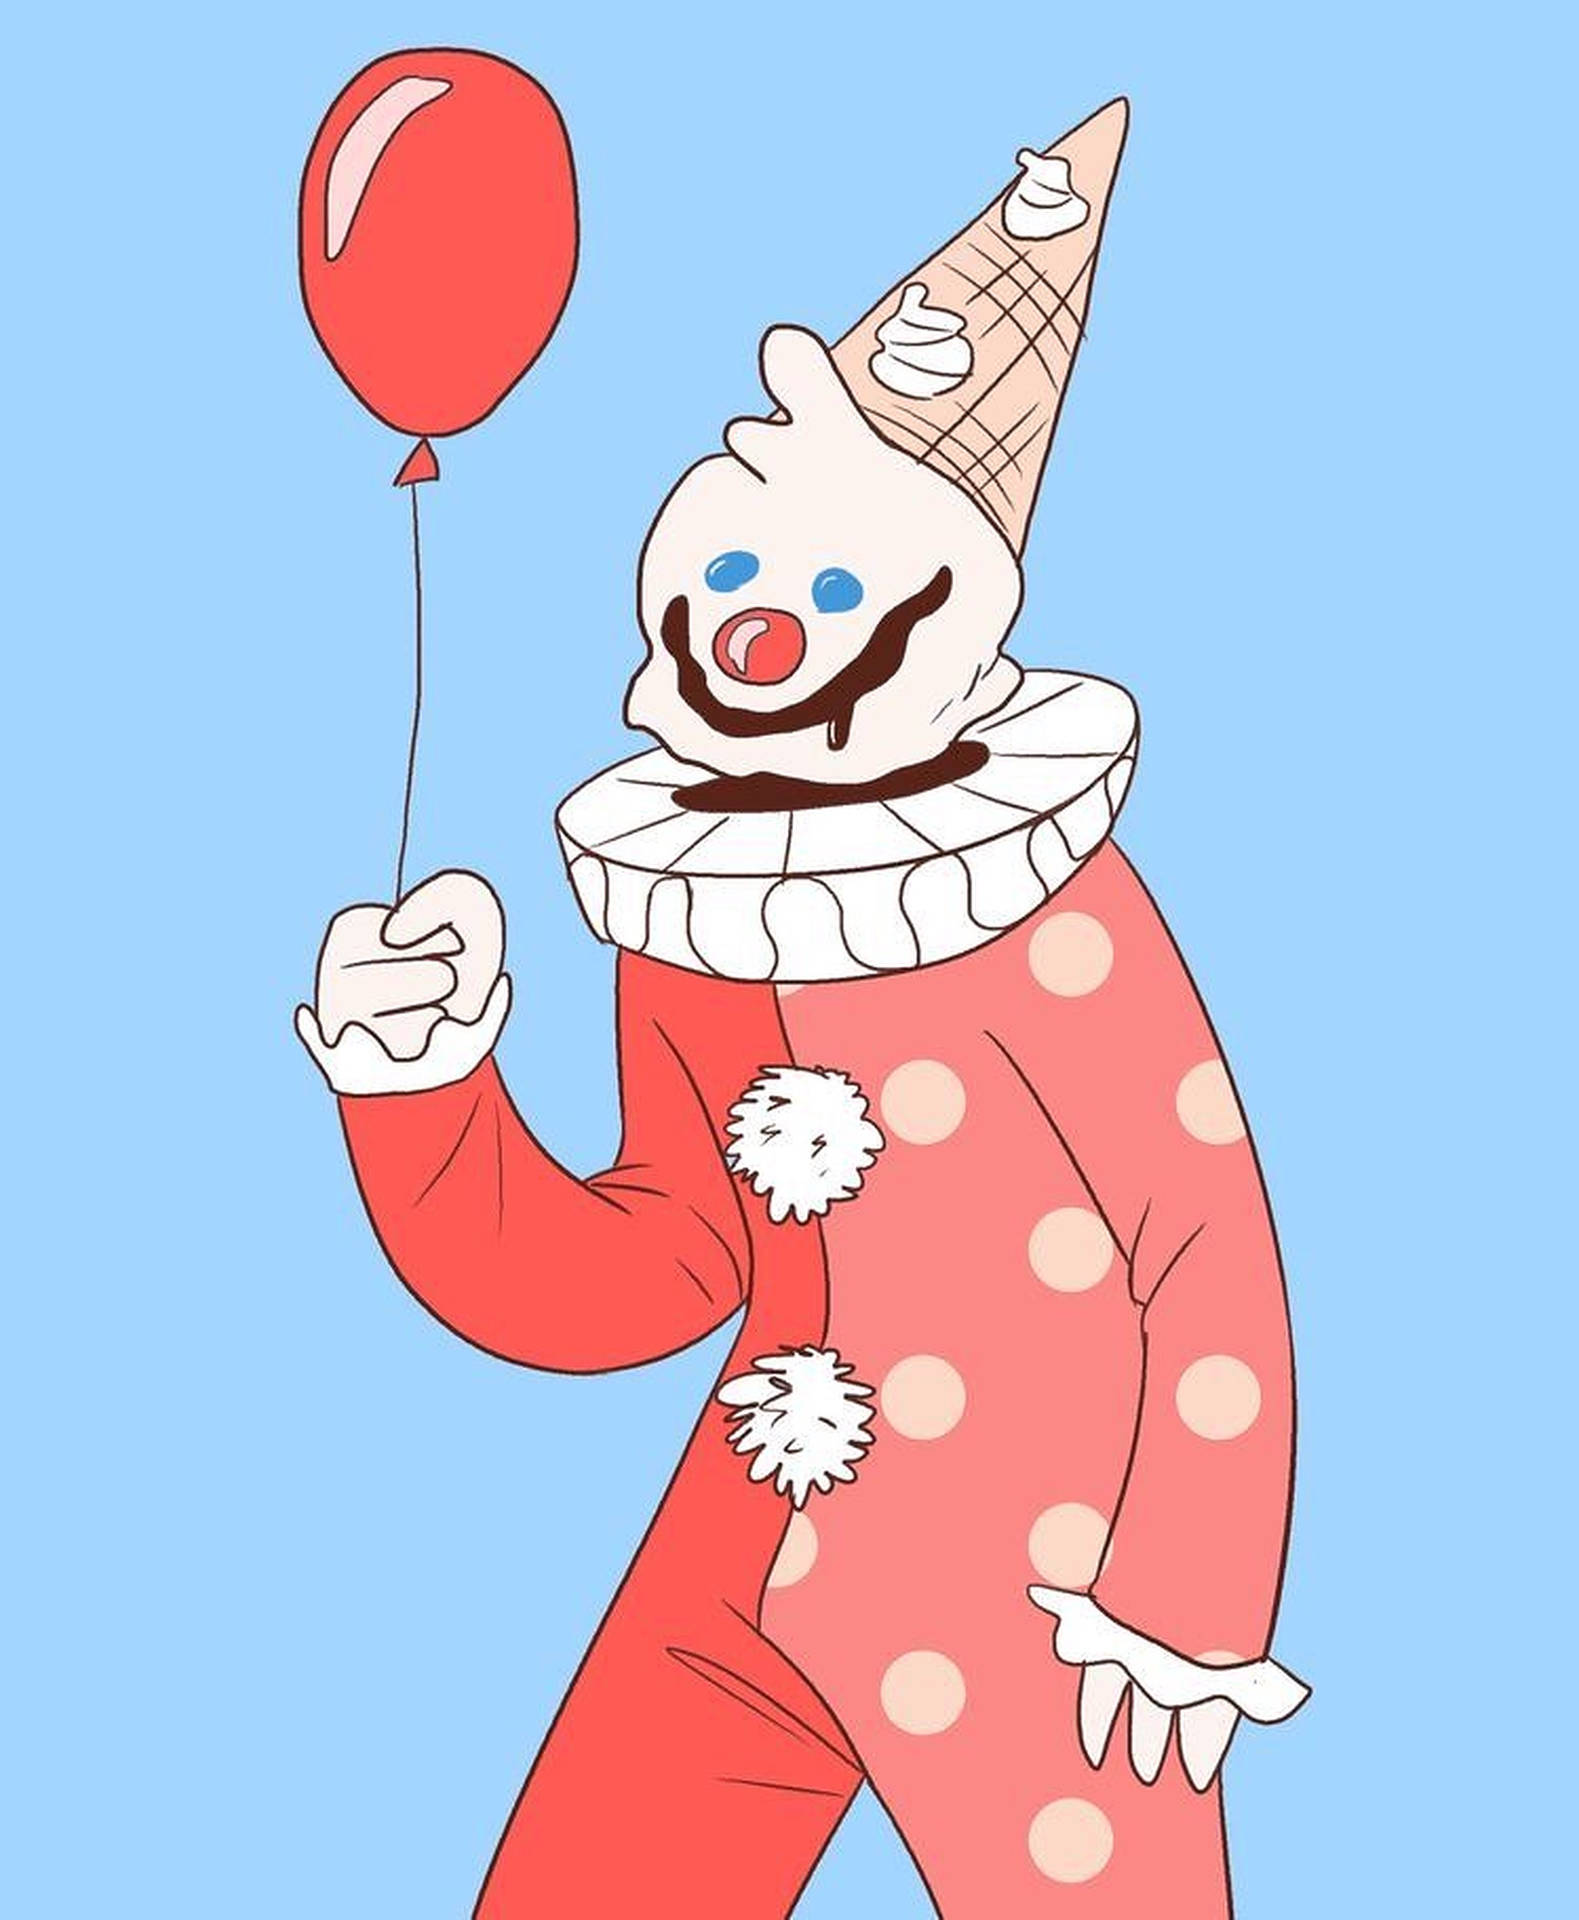 Clown With Red Balloon Wallpaper